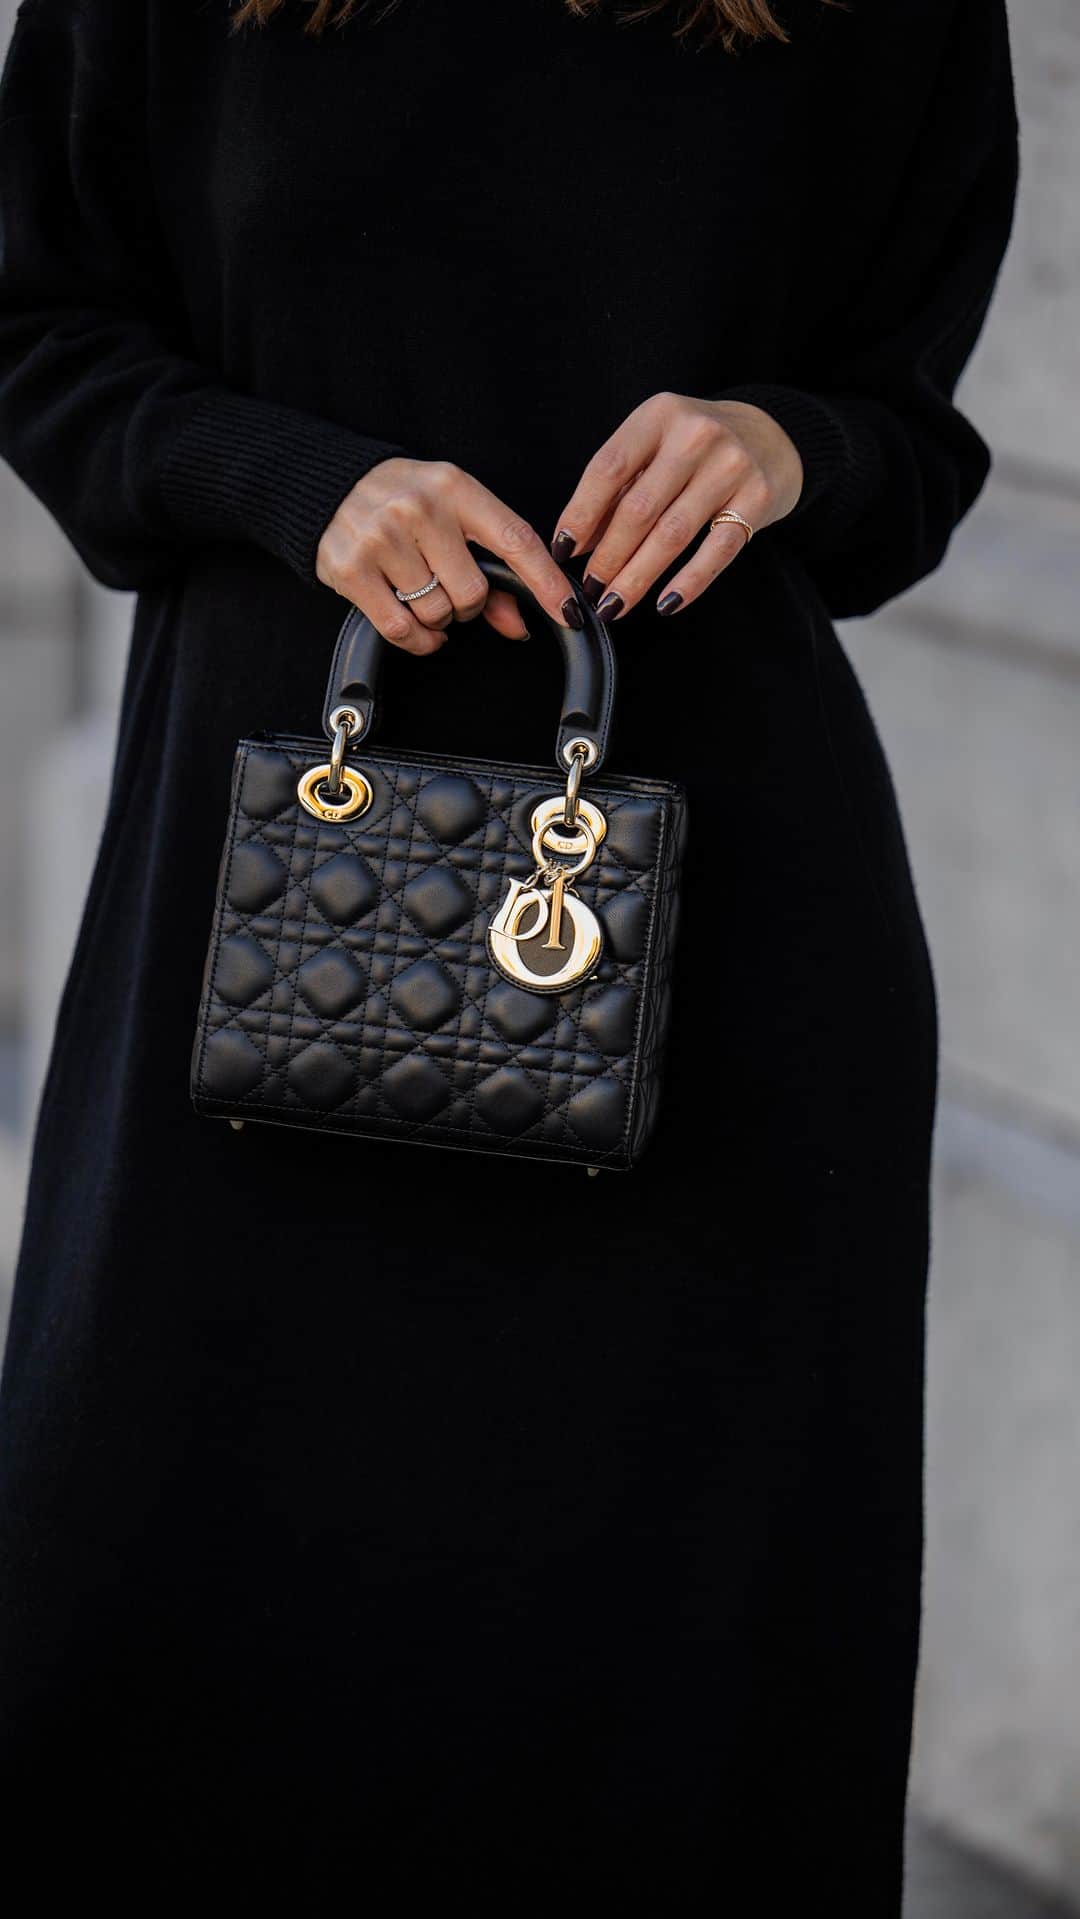 Zina Charkopliaのインスタグラム：「Ecstatic about my latest addition – the Lady @dior bag in timeless black. This iconic piece, a long-time aspiration, now graces my collection. Overflowing with happiness to finally embrace this style. #LadyDior #Dior #Fashion #timeless #iconic 📷 @thestyleograph」